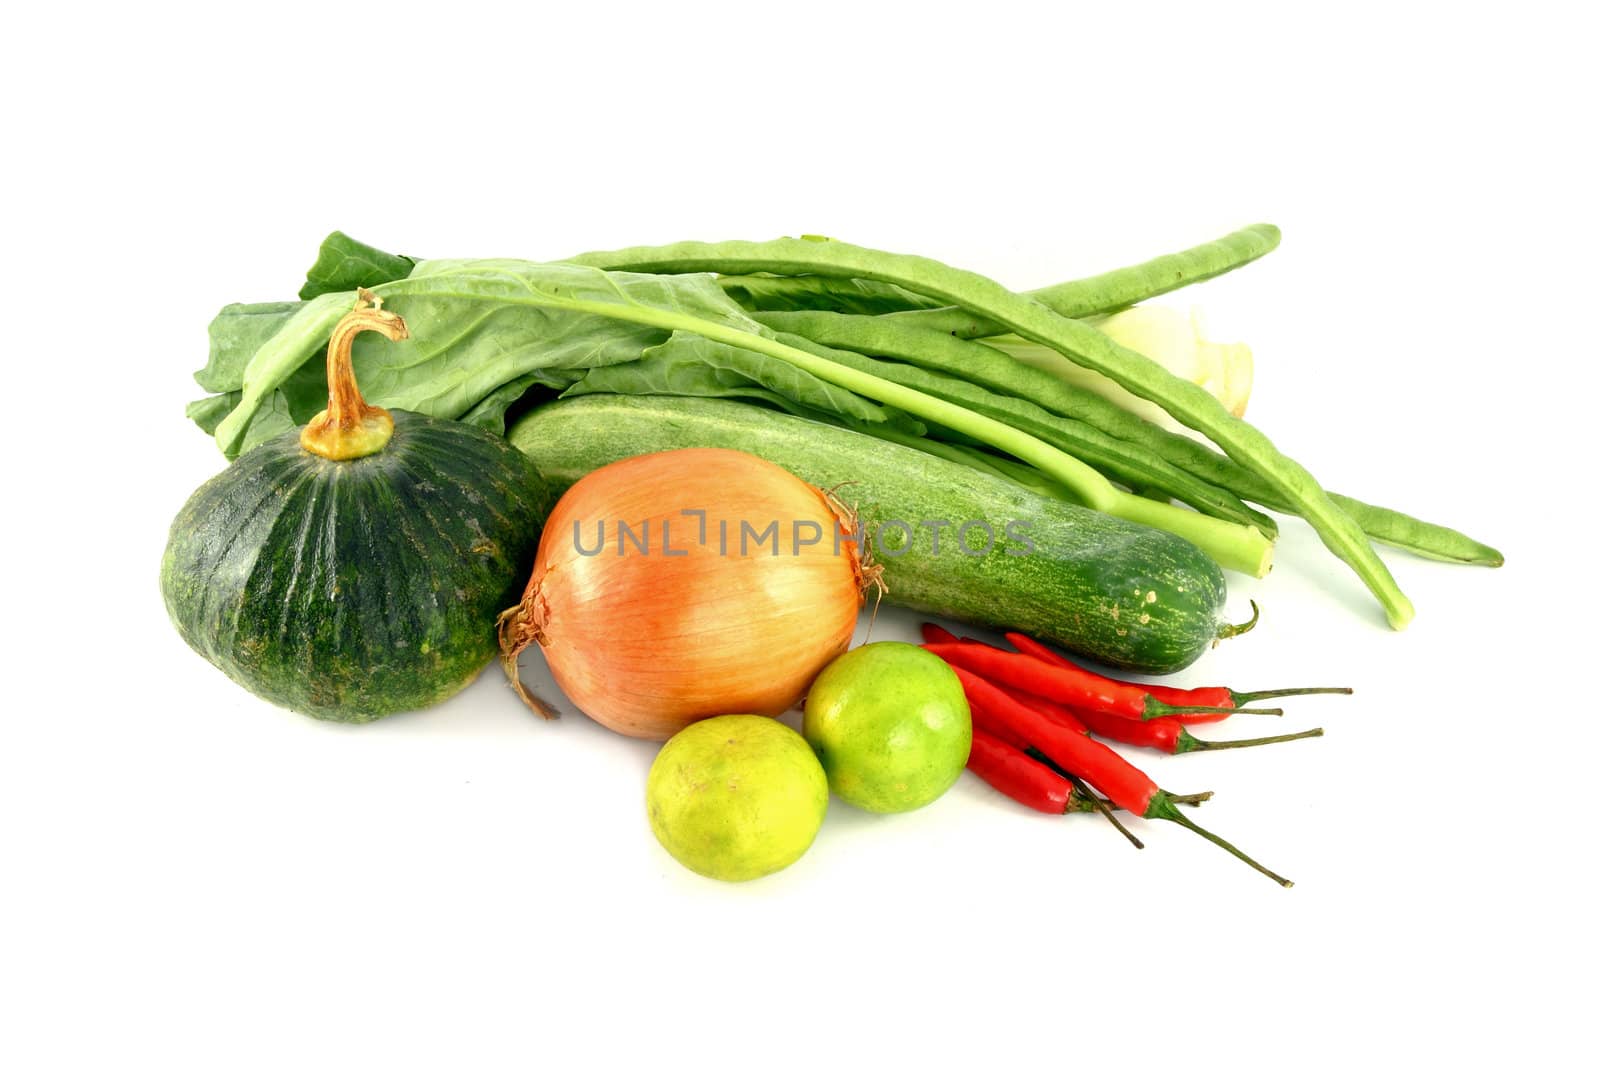 Vegetables mix on white background by geargodz